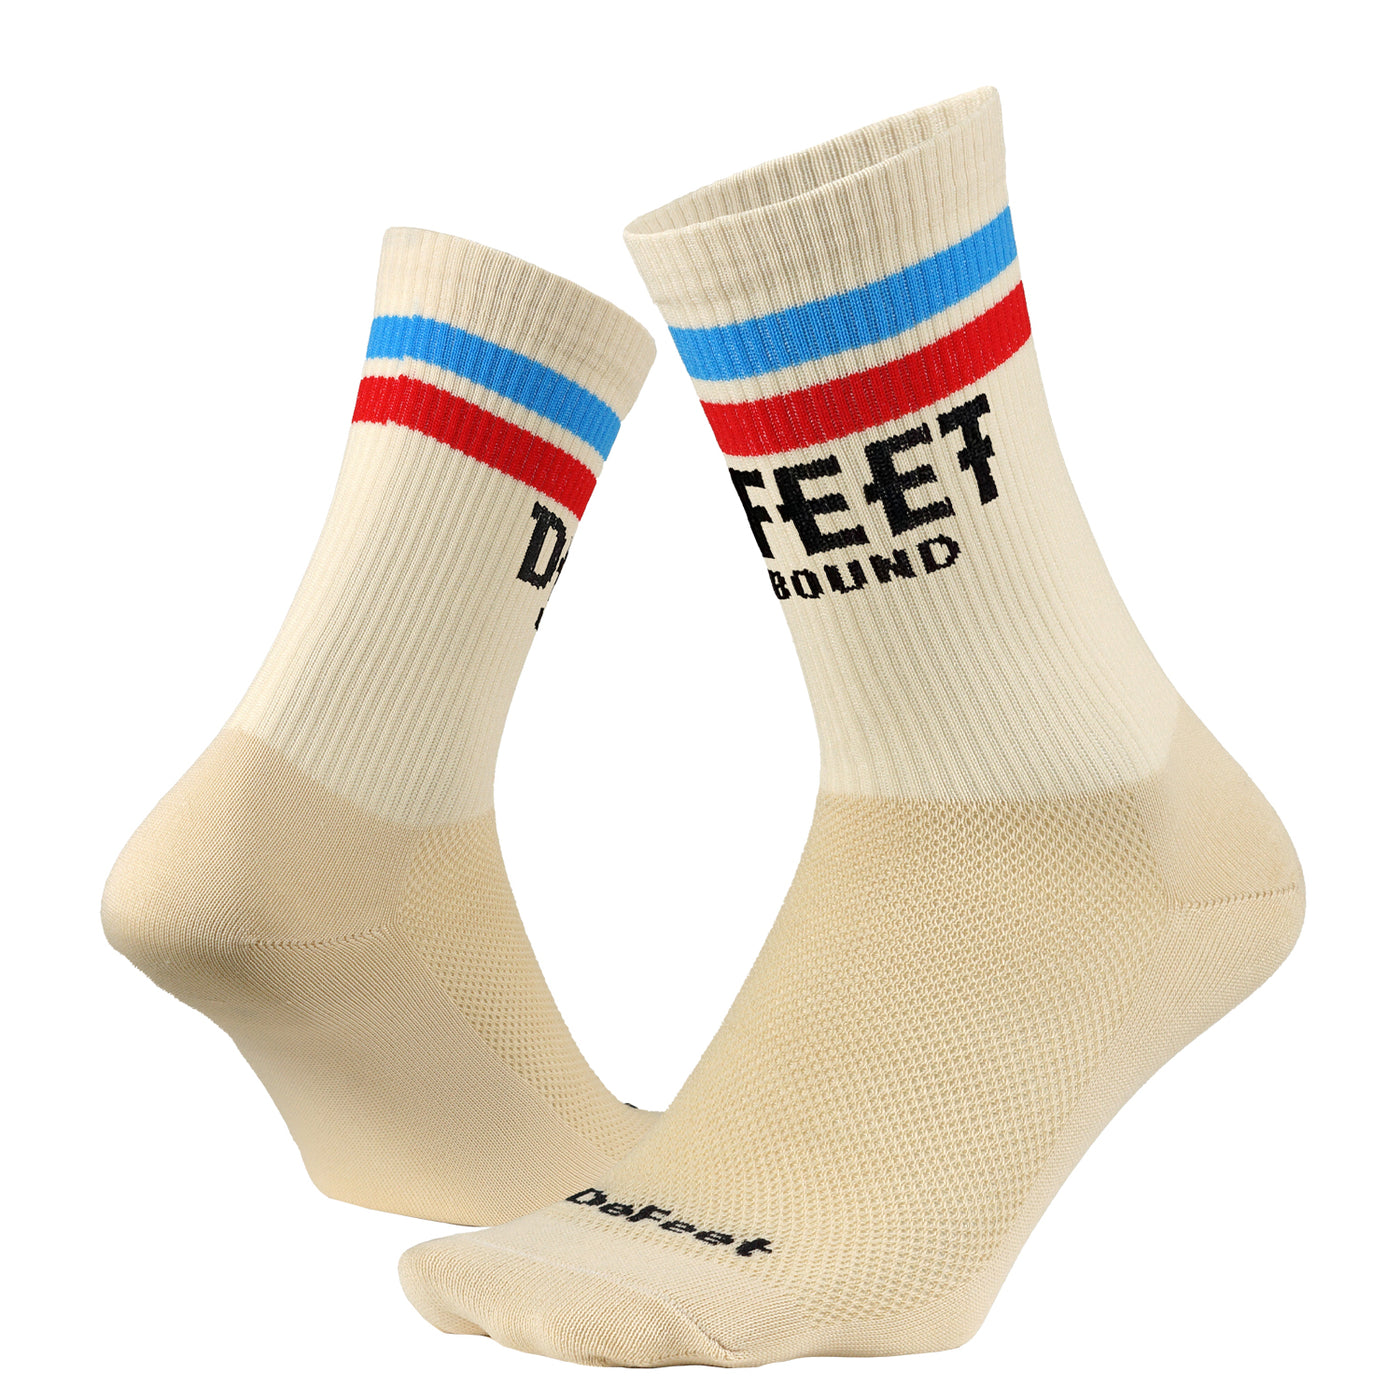 custom cream ribbed cycling socks, front and back, for the Unbound Gravel race